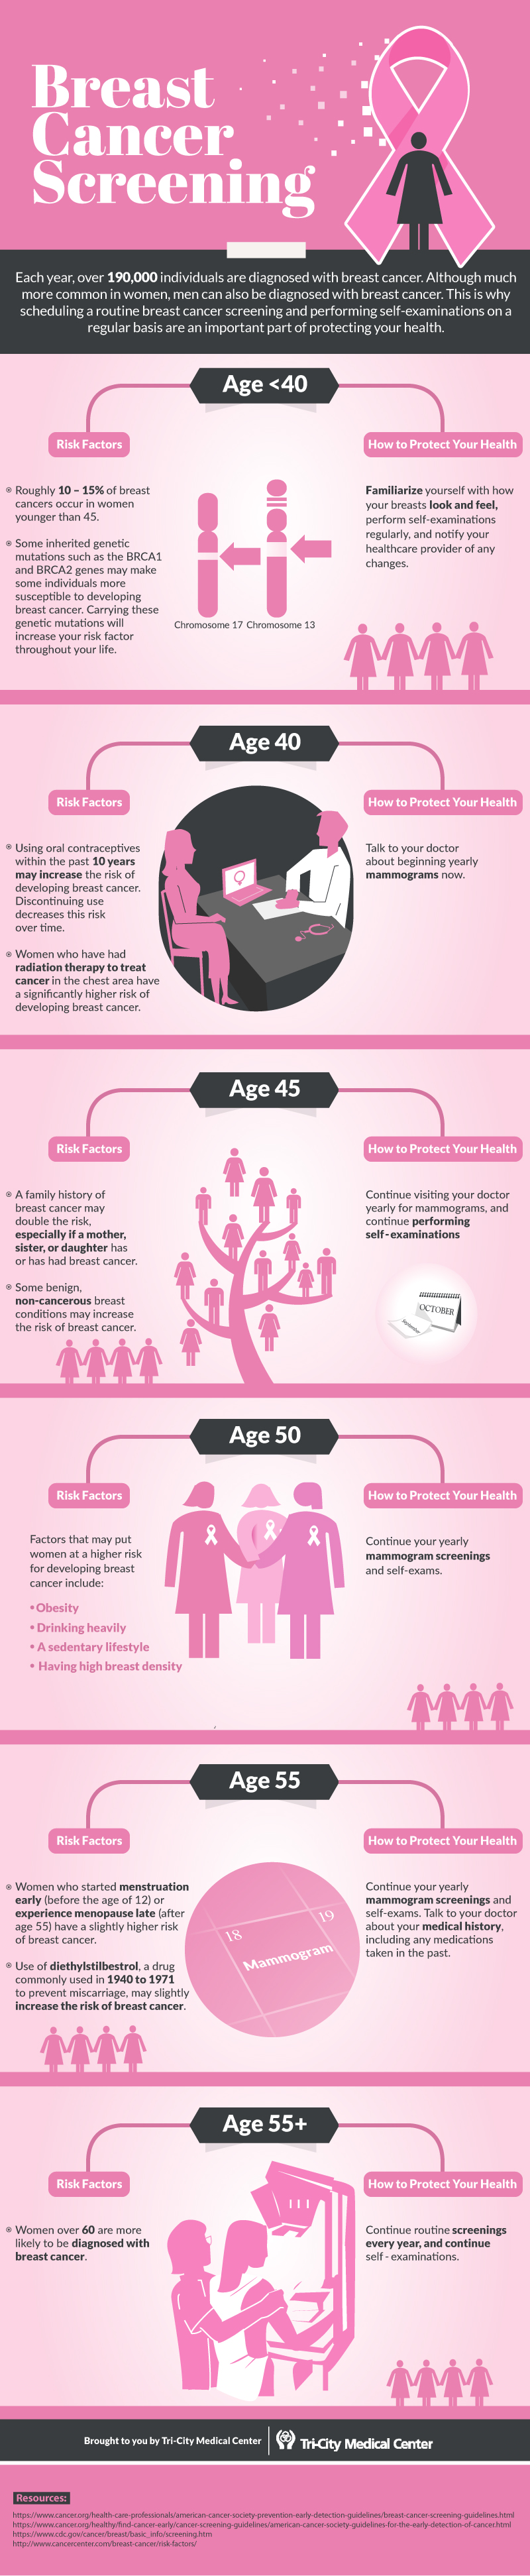 Breast Cancer Screening [infographic] Tri City Medical Center